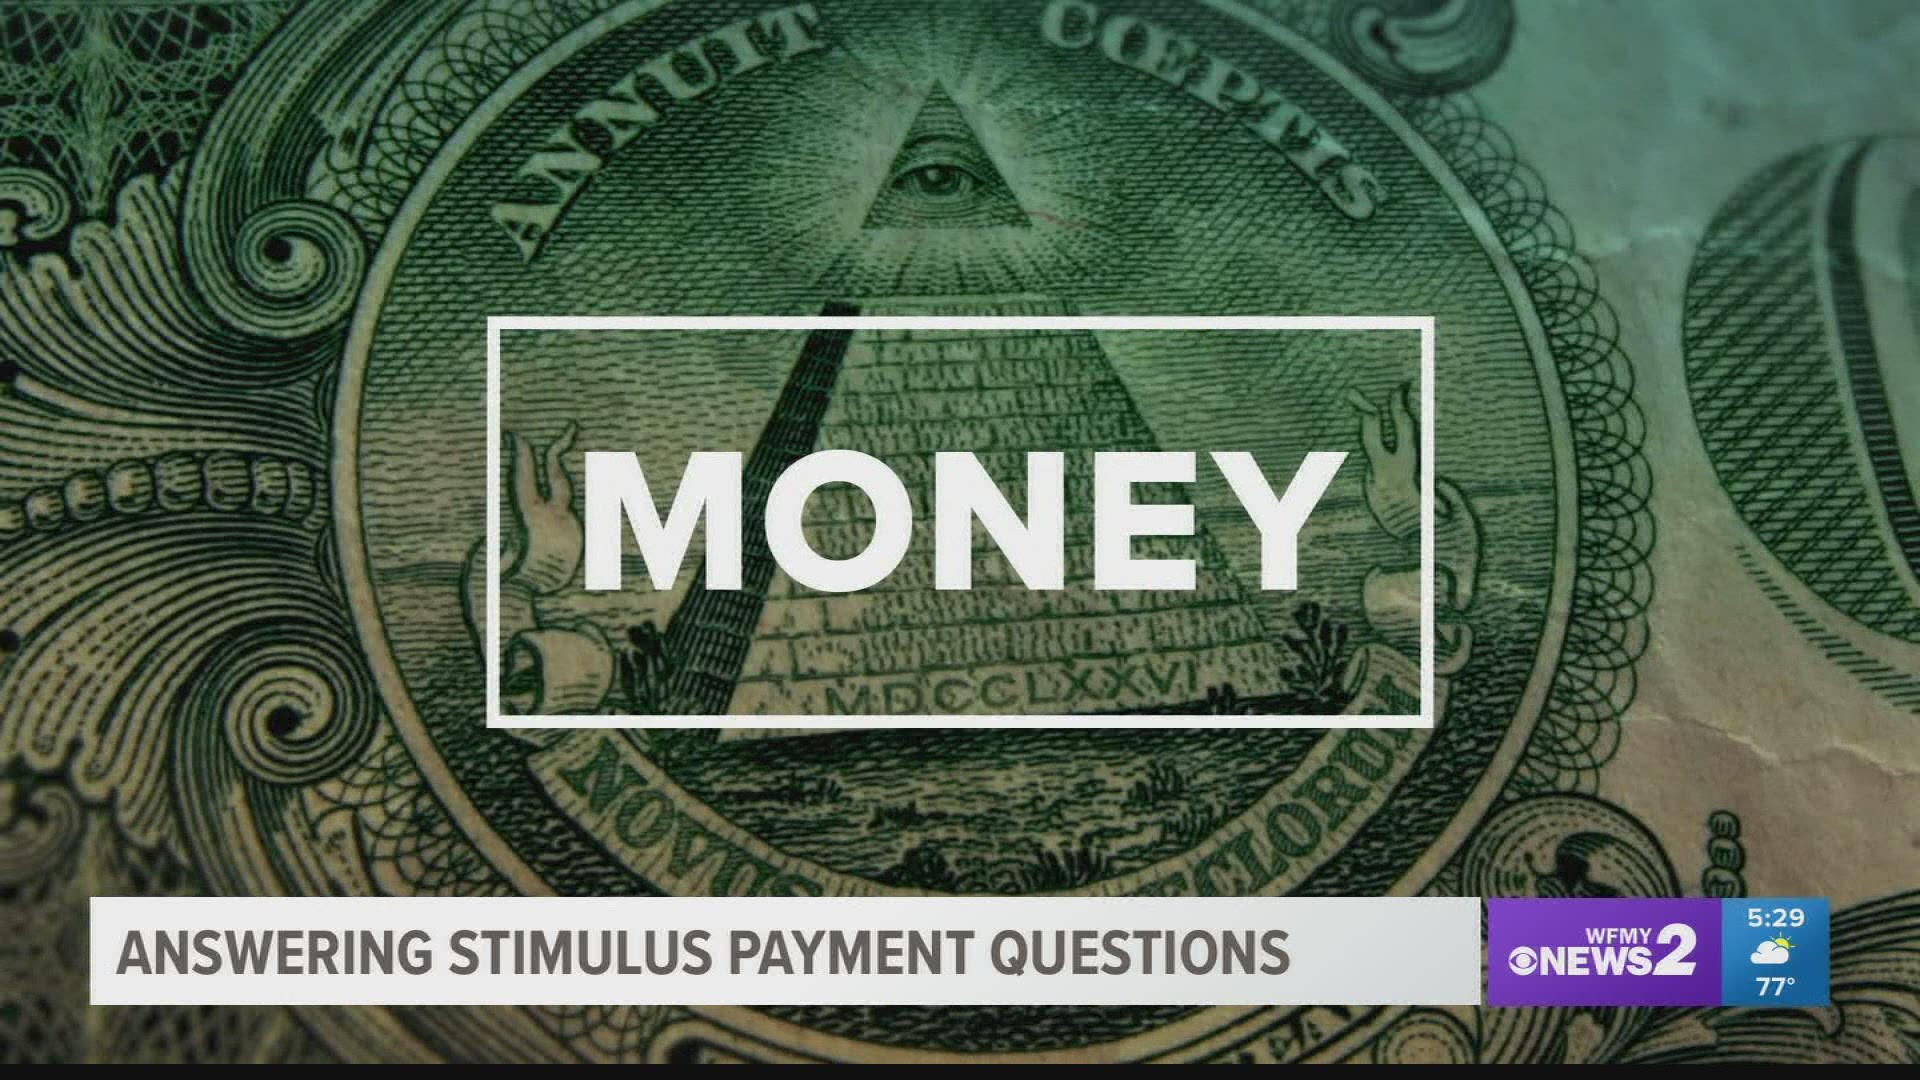 Experts answer viewer questions about stimulus payments.